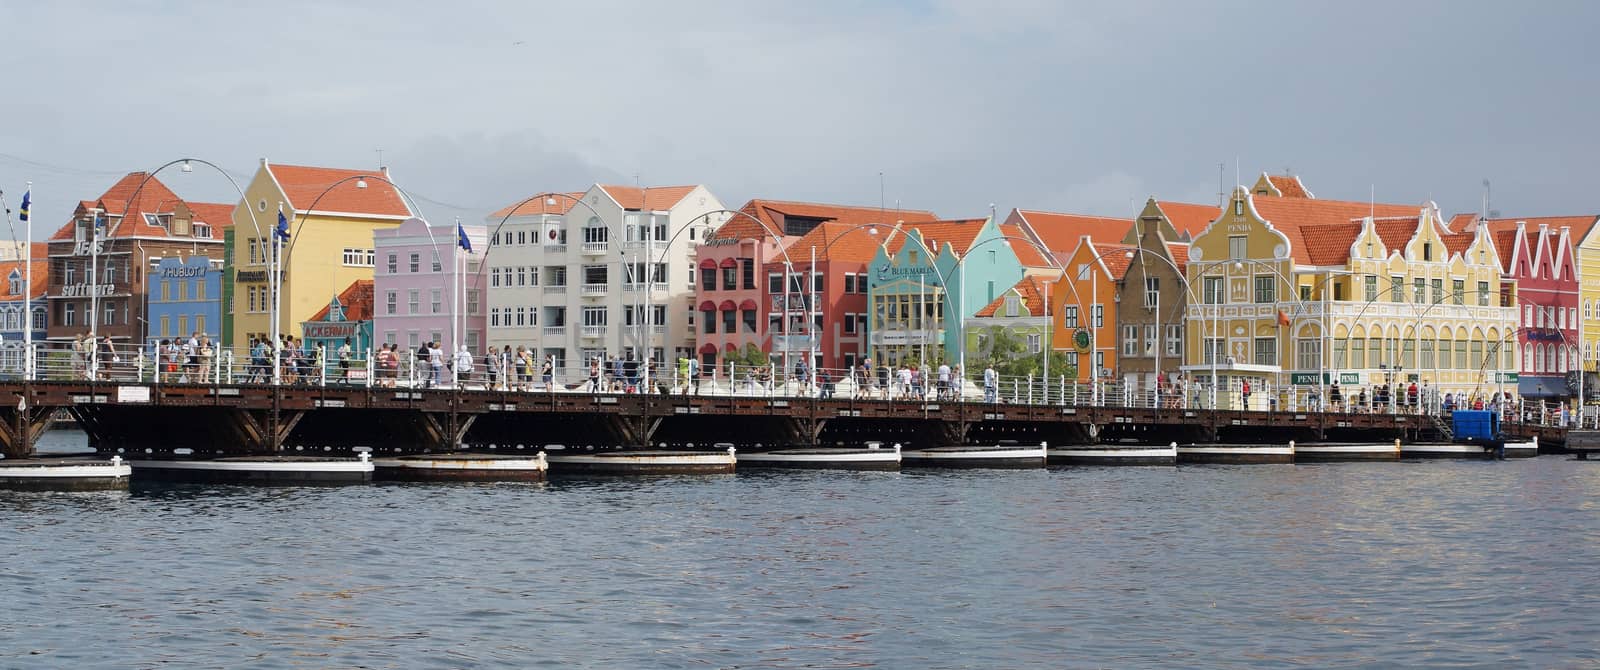 WILLEMSTAD, CURACAO - DECEMBER 10, 2013: Panorama of the Queen Emma Bridge in front of the Punda district on December 10, 2013 in Willemstad, Curacao, ABC Islands,